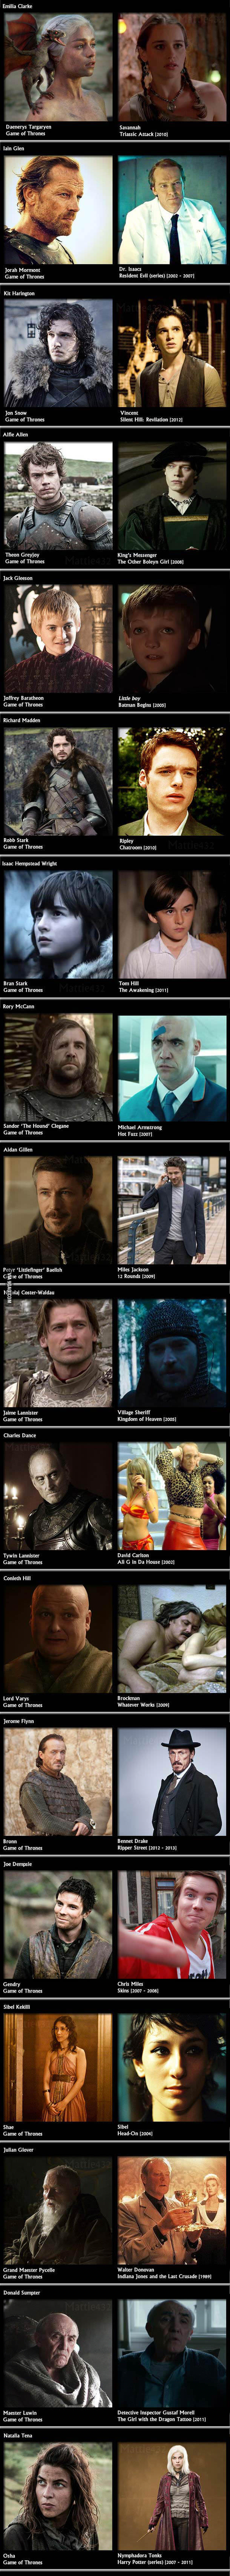 Other Roles of the Game of Thrones Cast